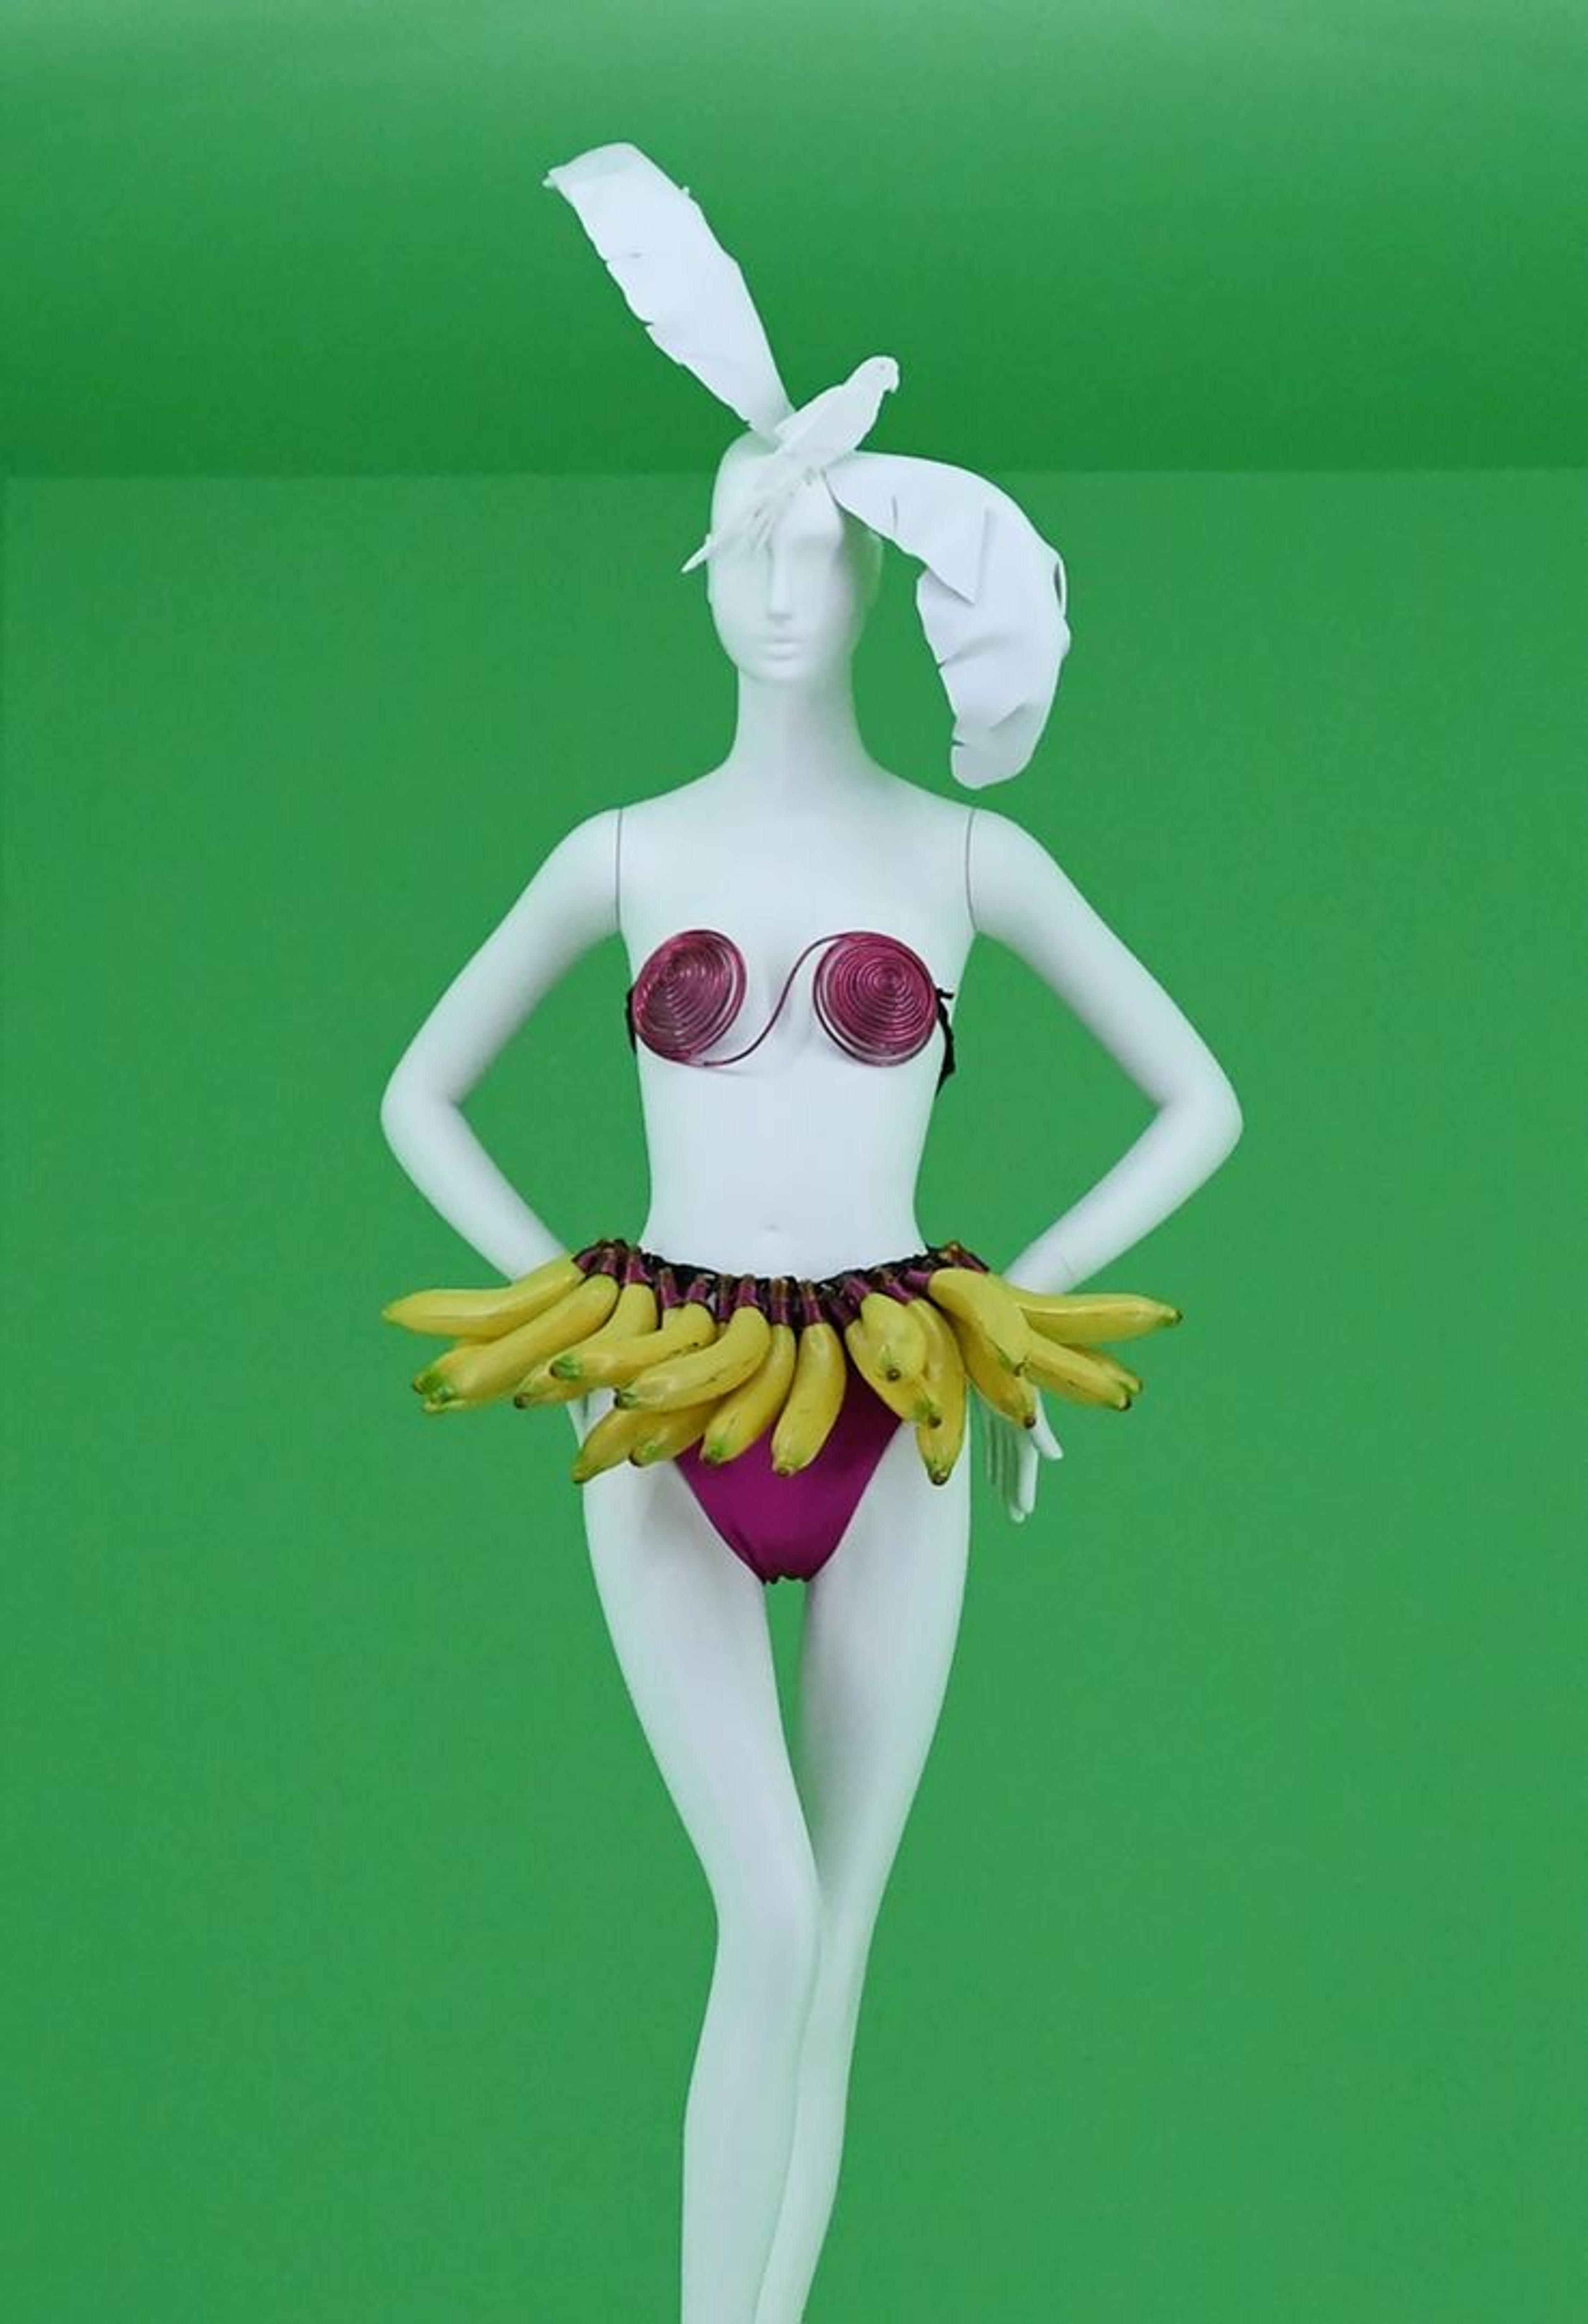 Image of Josephine Baker Banana Dance costume by Patrick Kelly, a dress with a skirt made of large bananas.